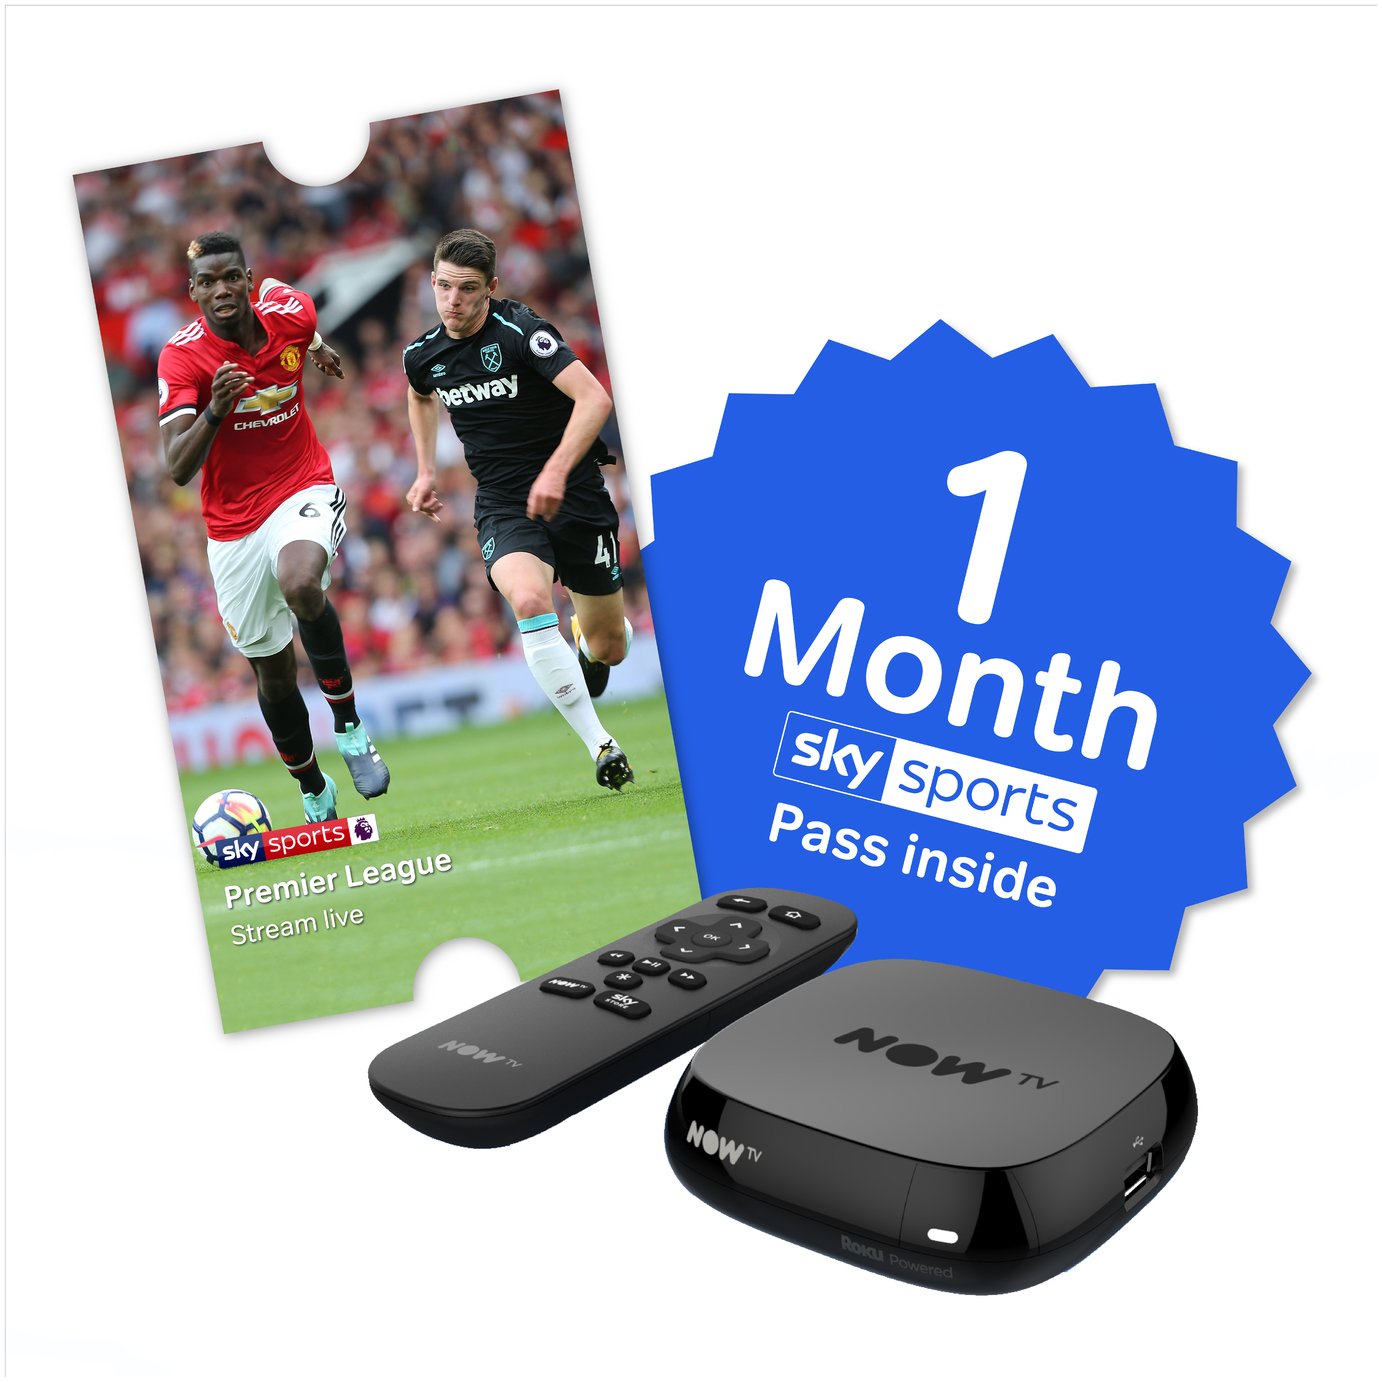 NOW TV Box with 1 Month Sky Sports Pass.